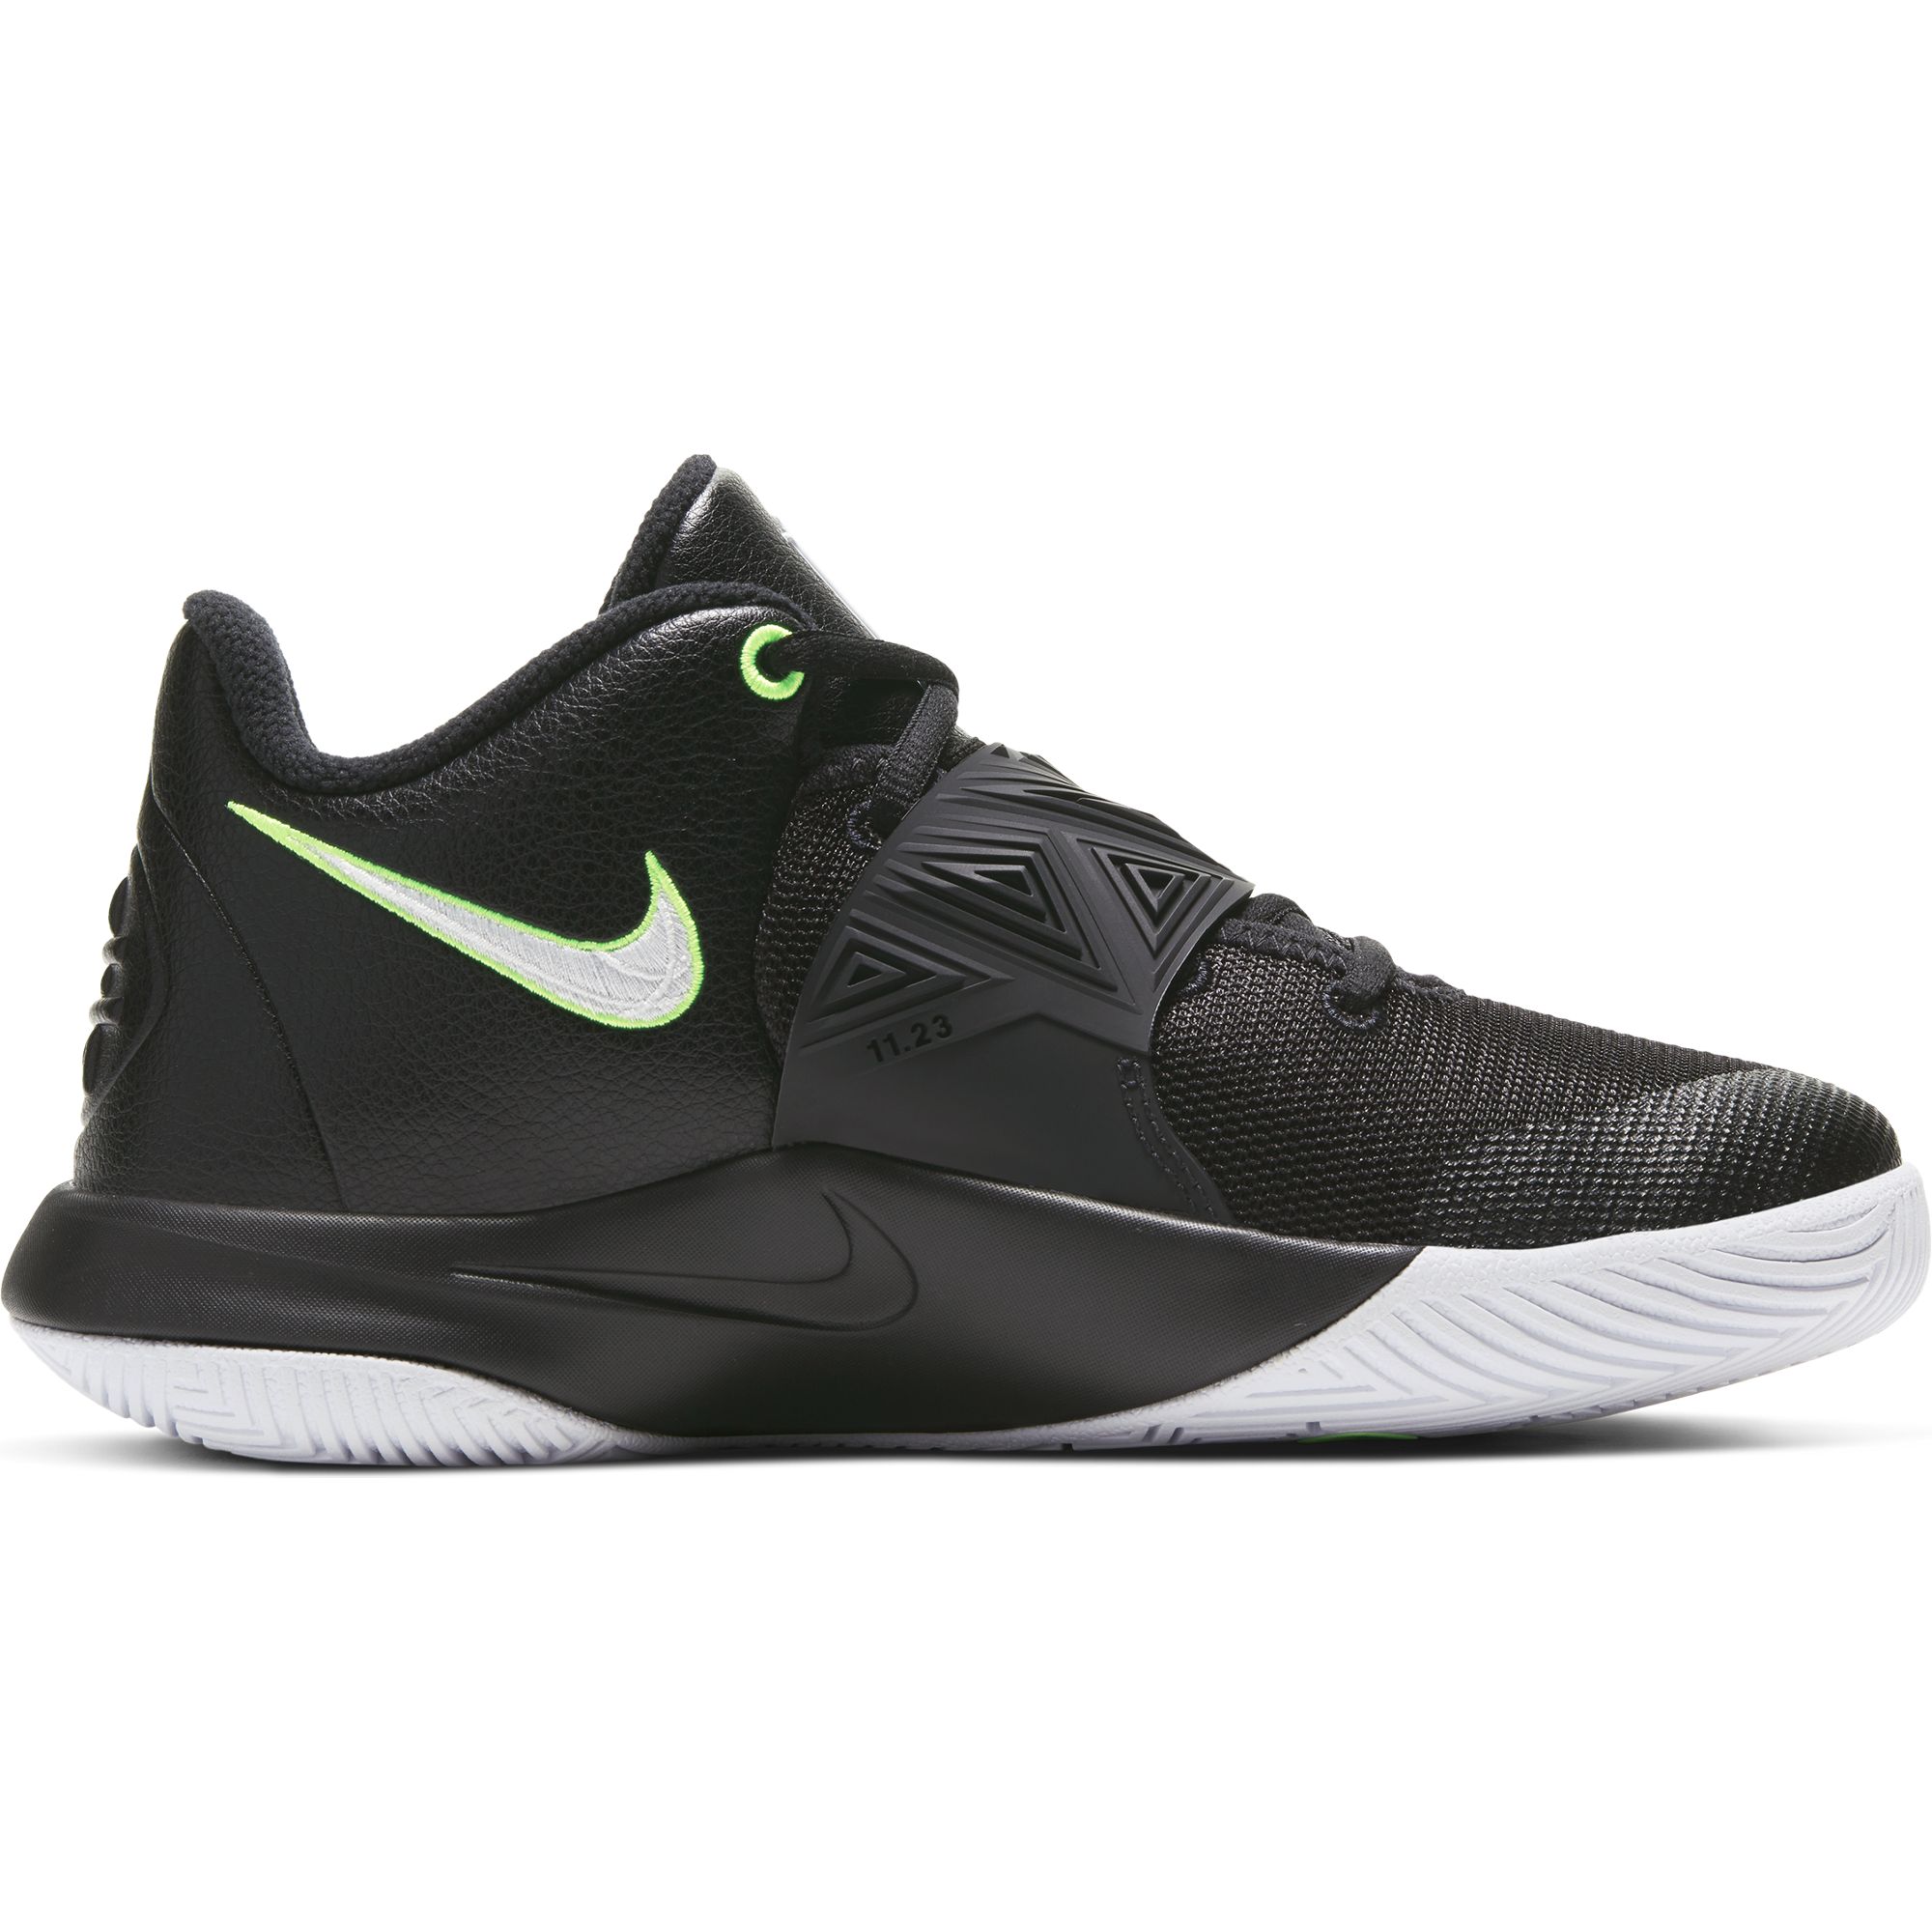 kyrie flytrap shoes youth